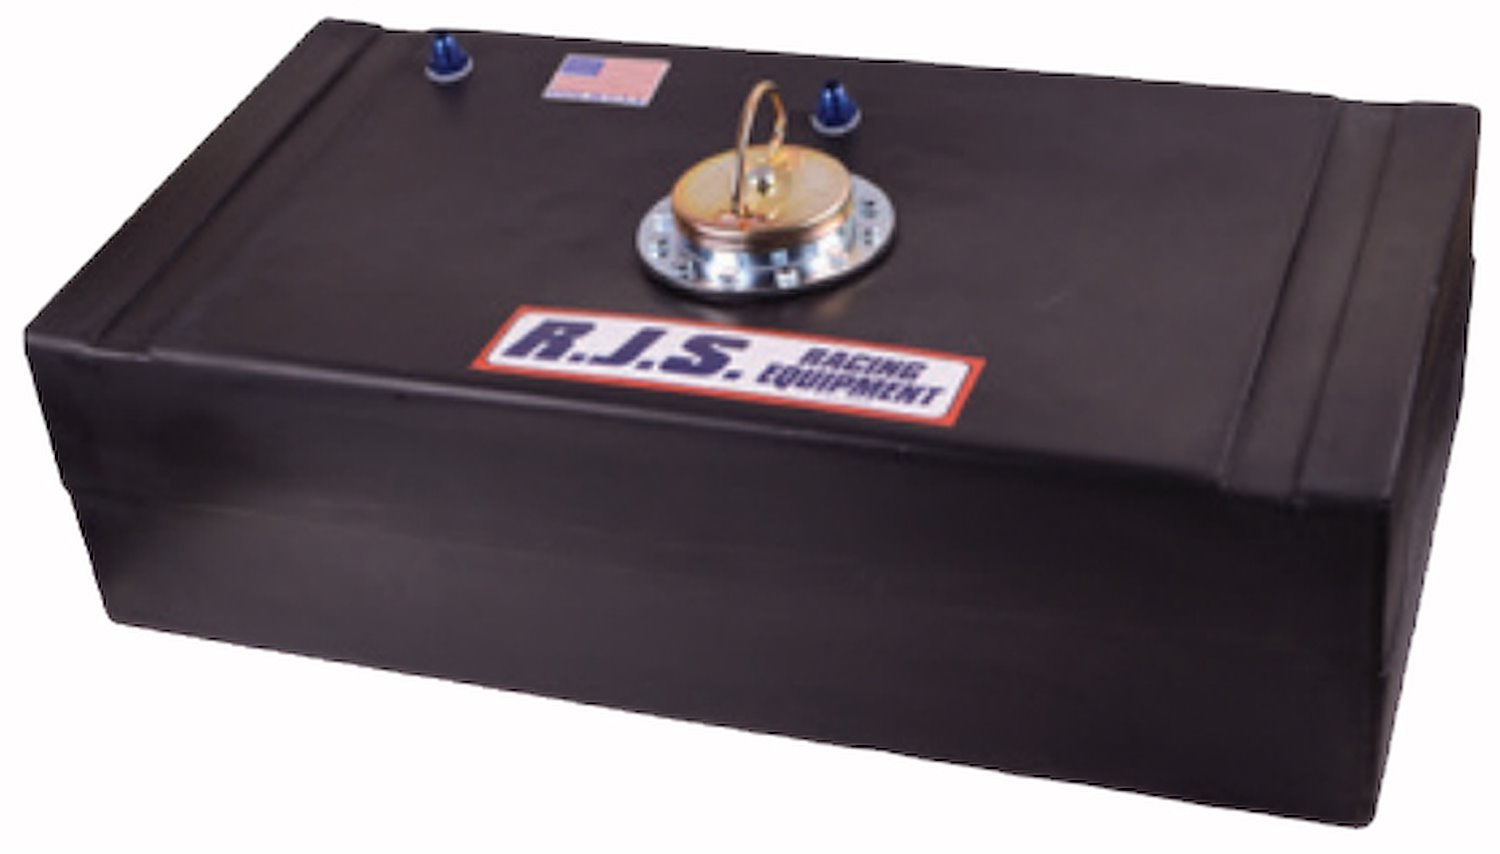 32 Gallon Economy Fuel Cell with Metal D-ring Filler Cap